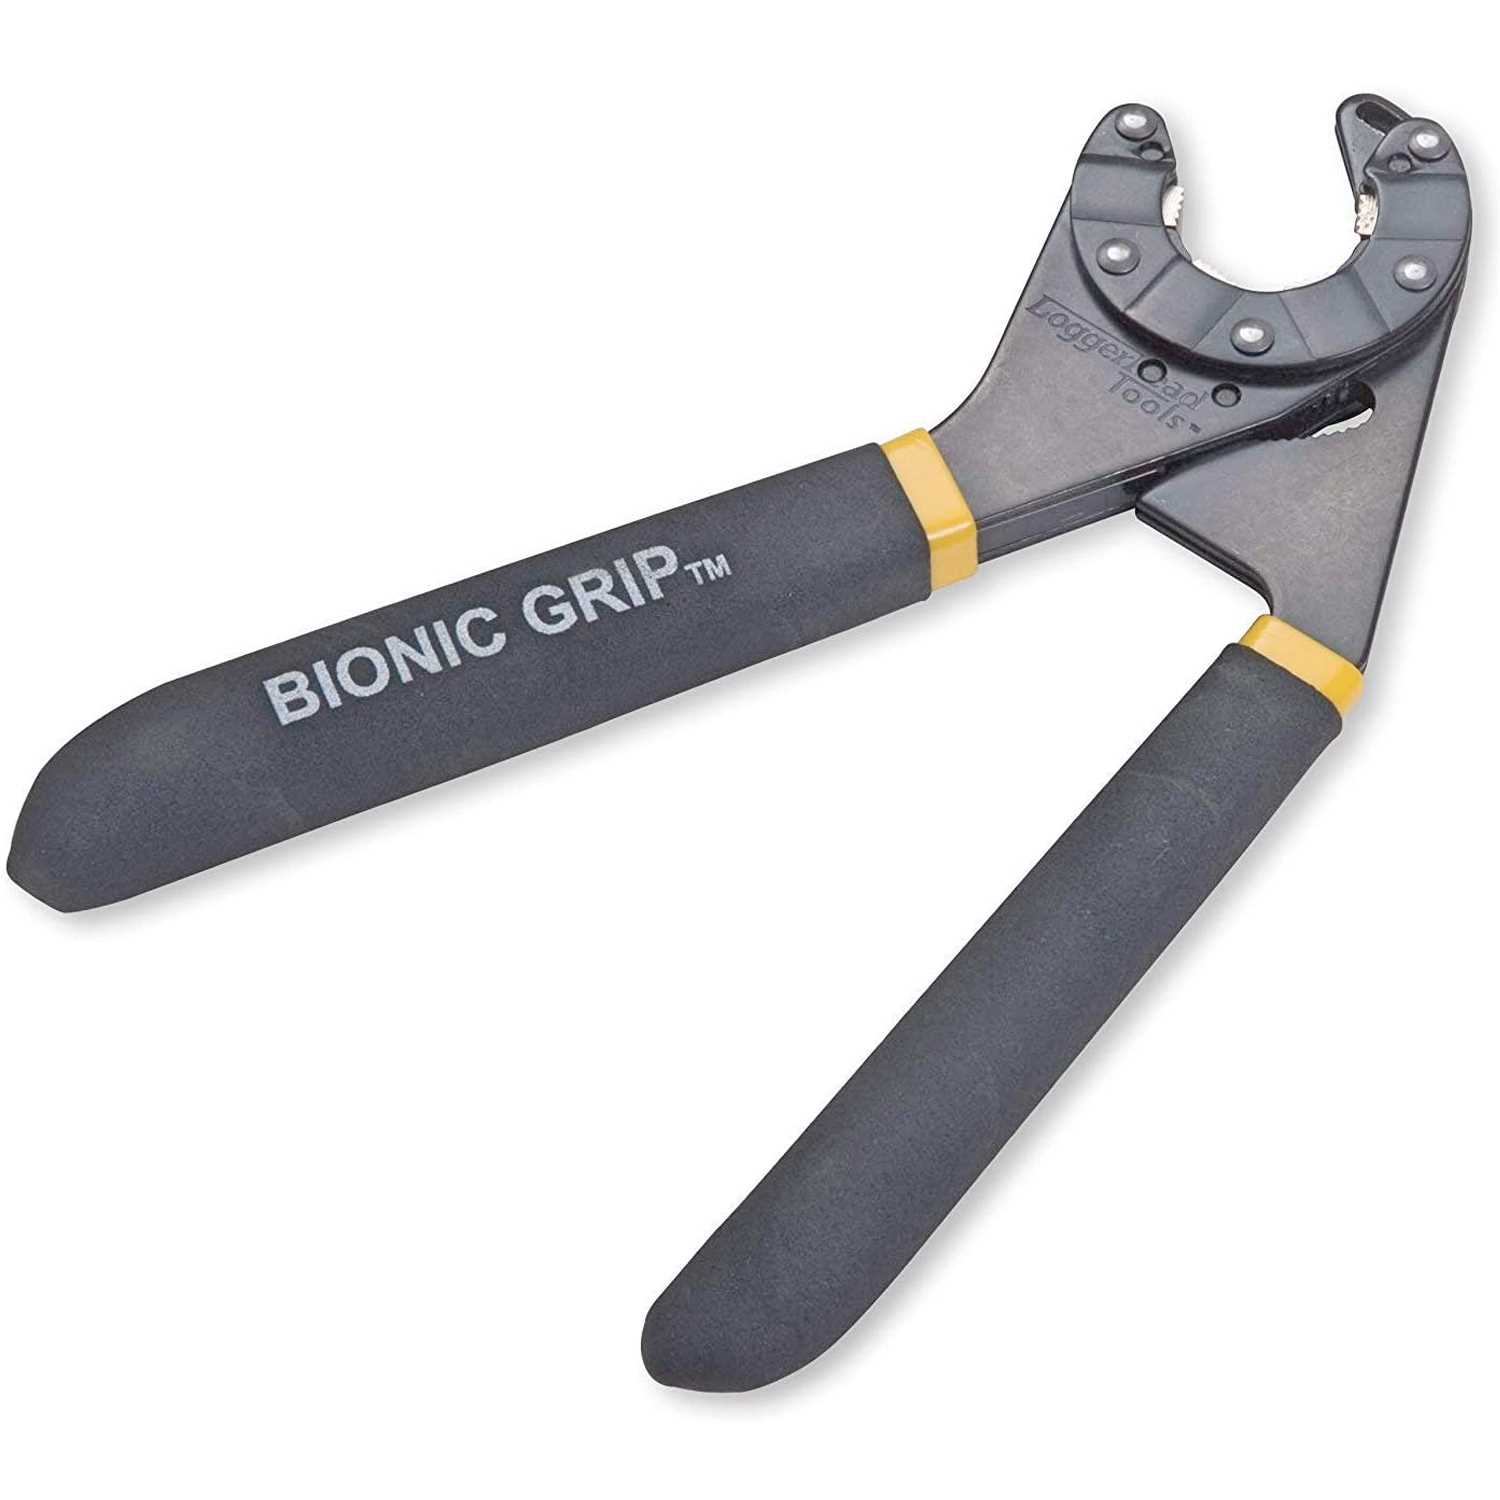 The Bionic Grip 14-in-1 Adjustable Wrench Main Photo - Father’s Day Gifts For Dad Who Wants Nothing